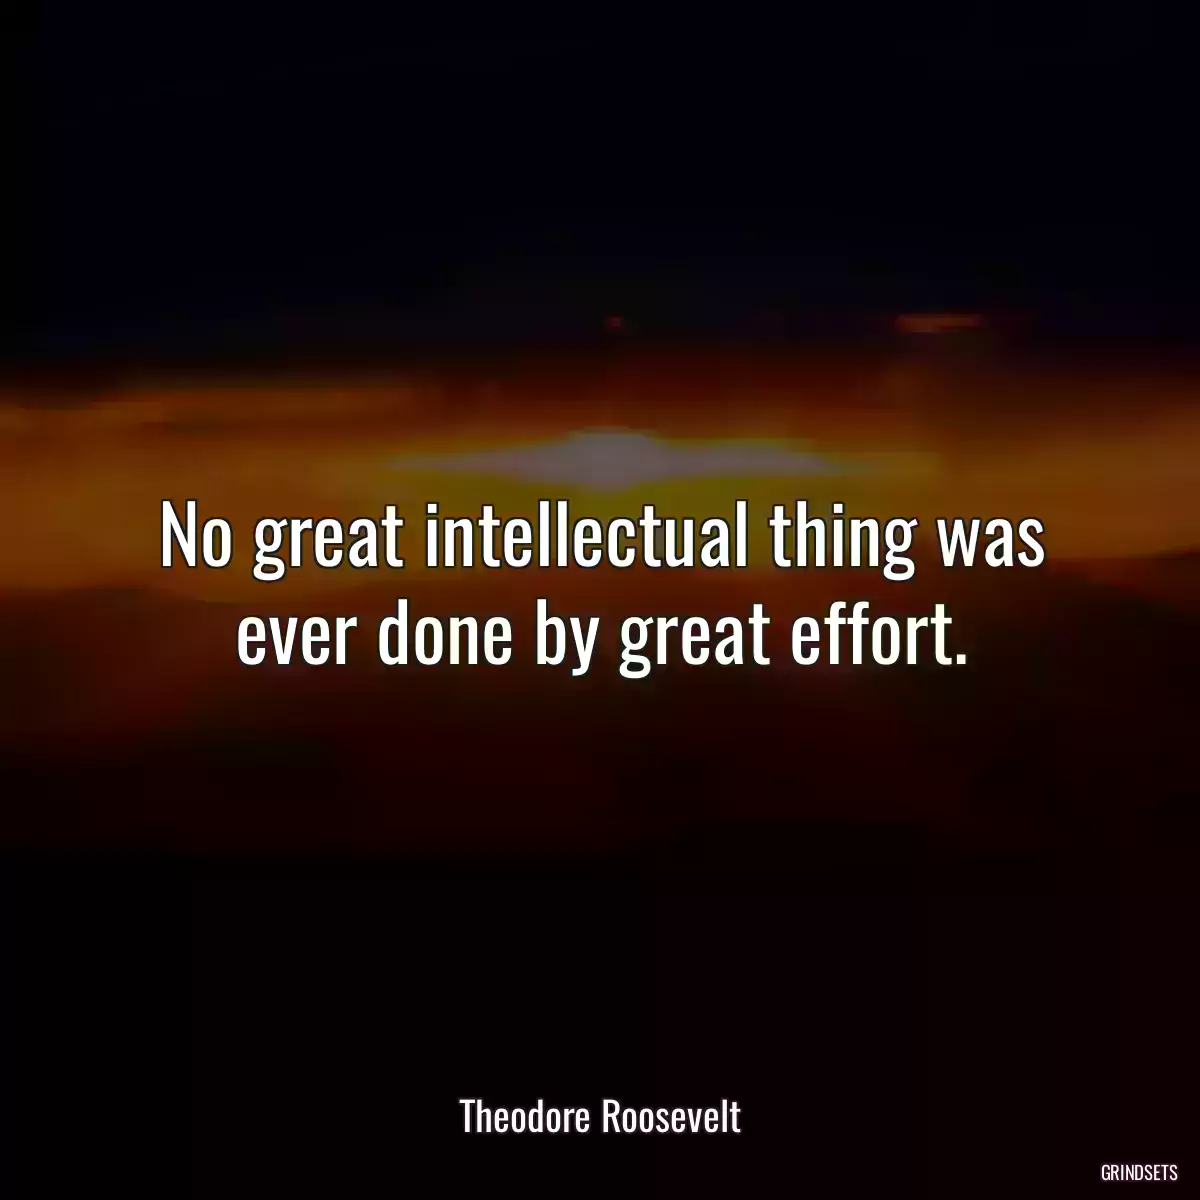 No great intellectual thing was ever done by great effort.